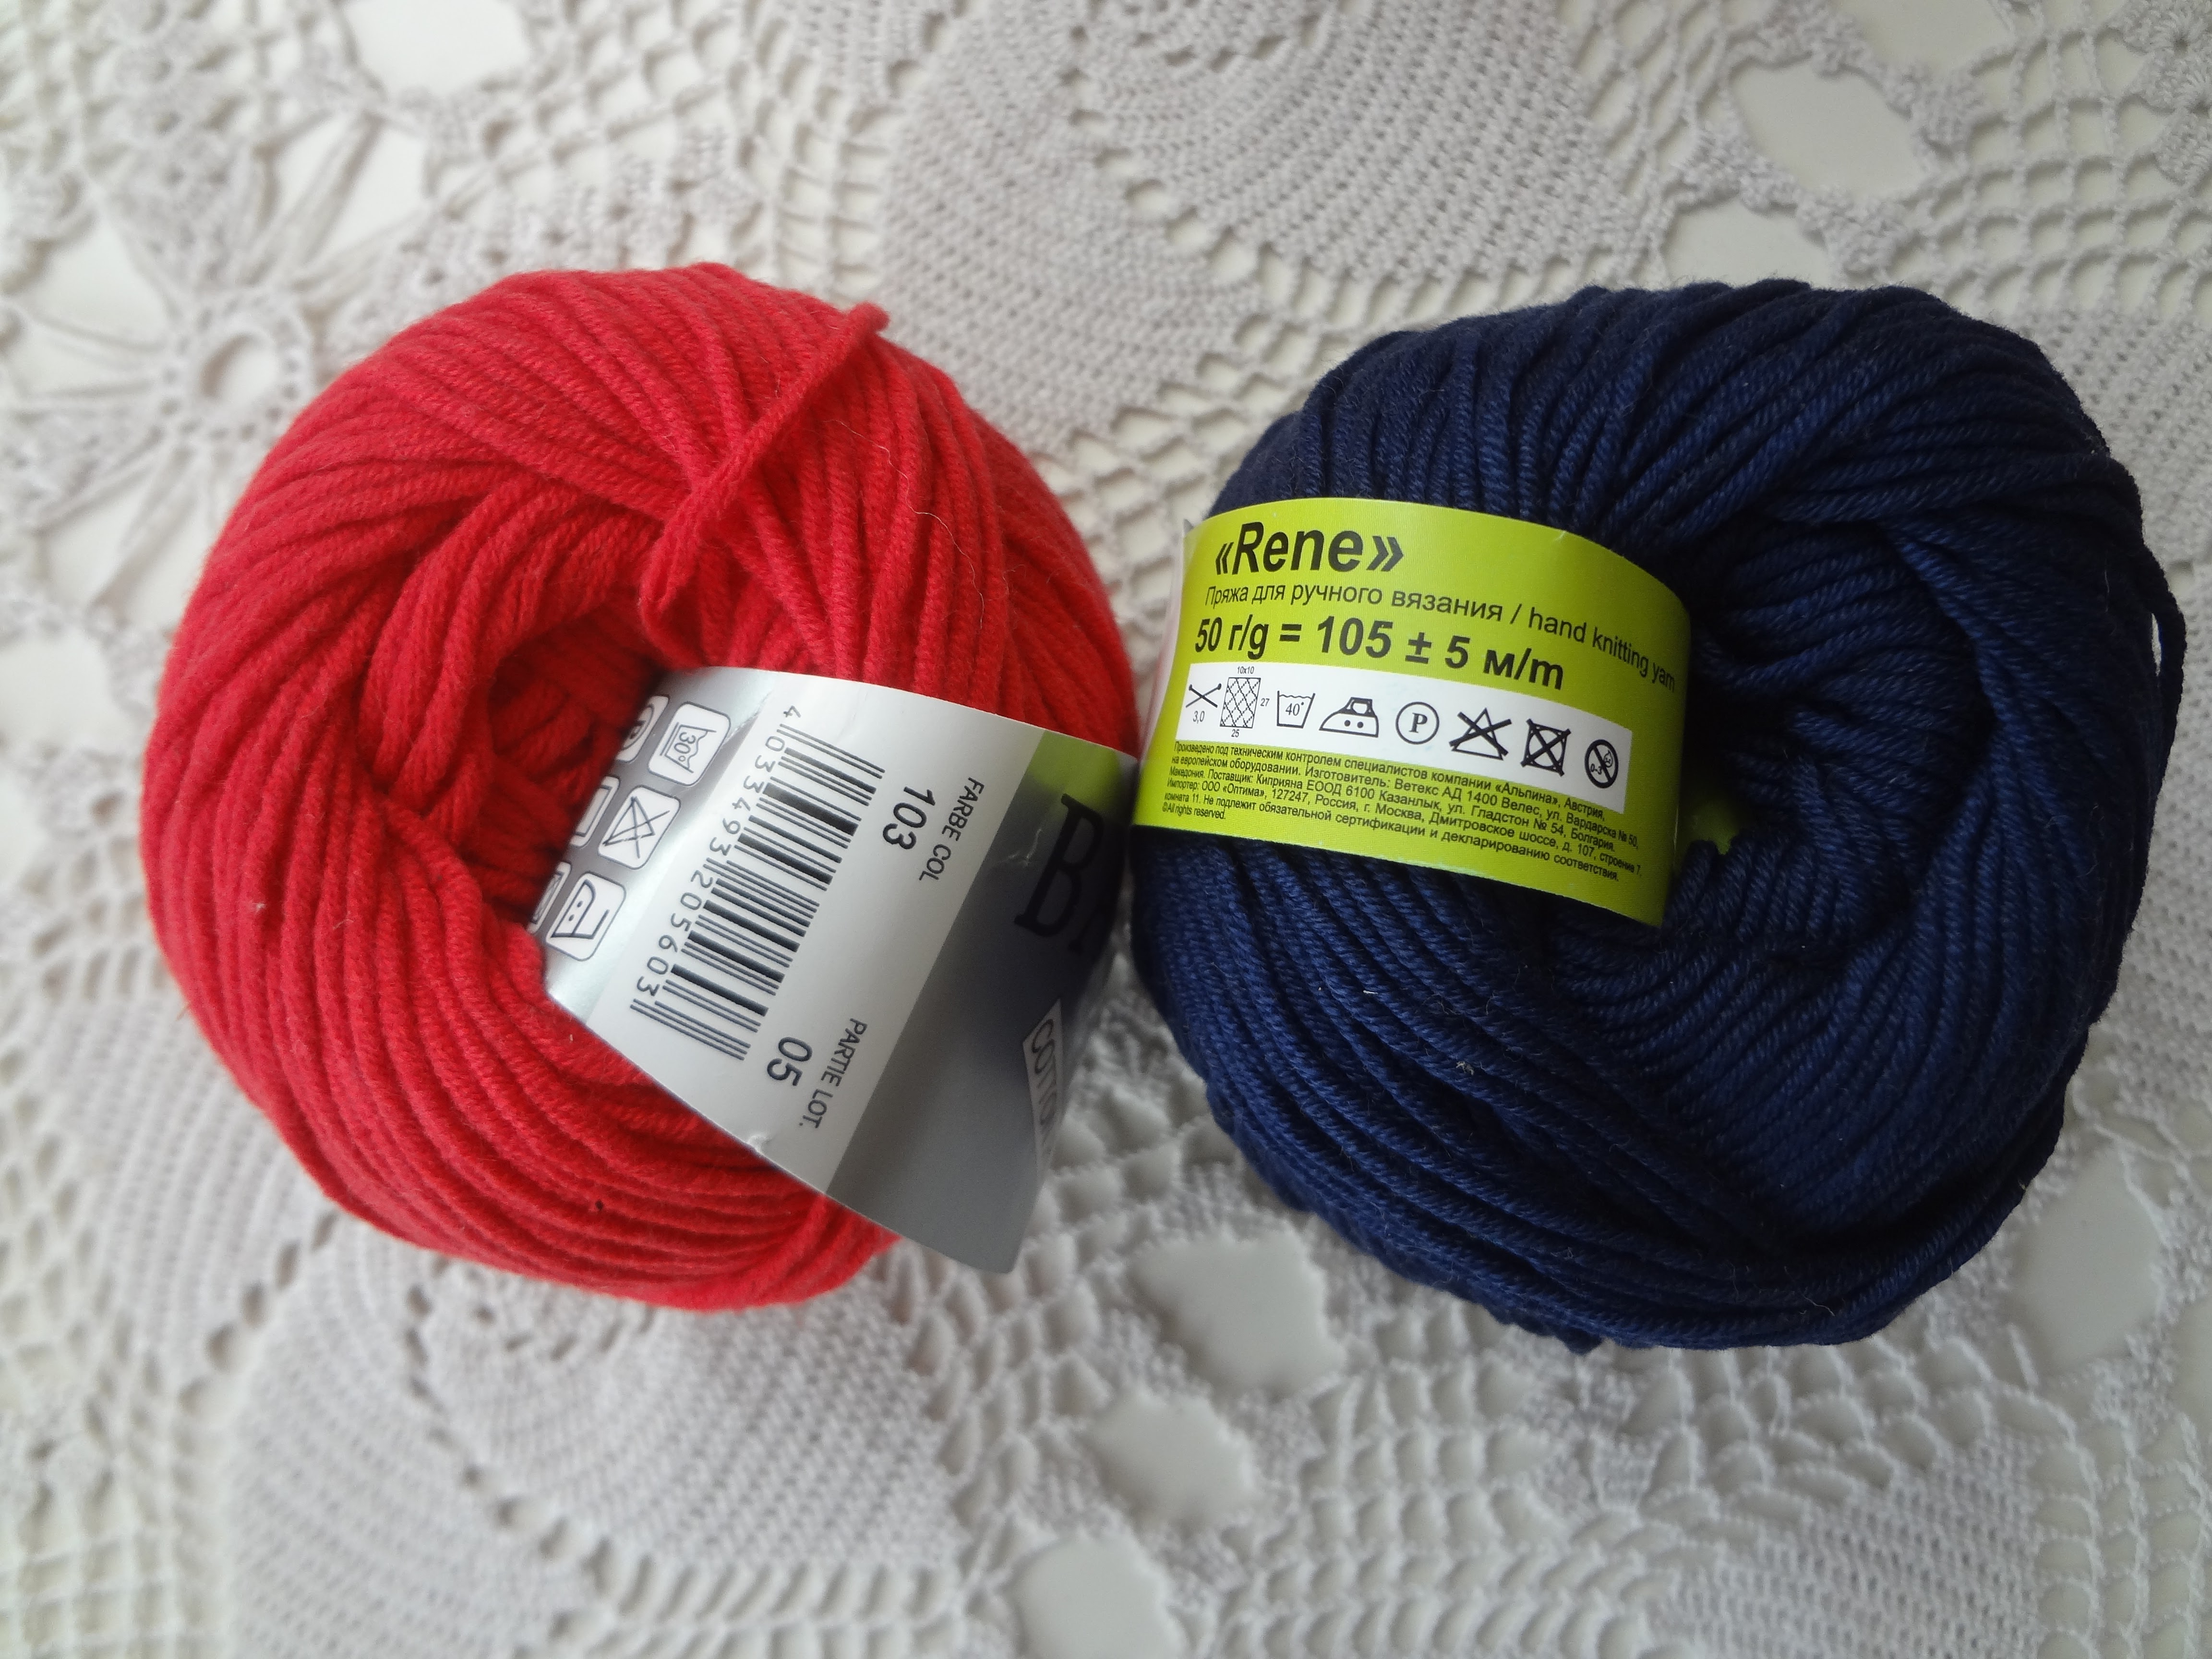 Rewinding of the Woolento yarn from the skein to the yarn ball (yarn cake)